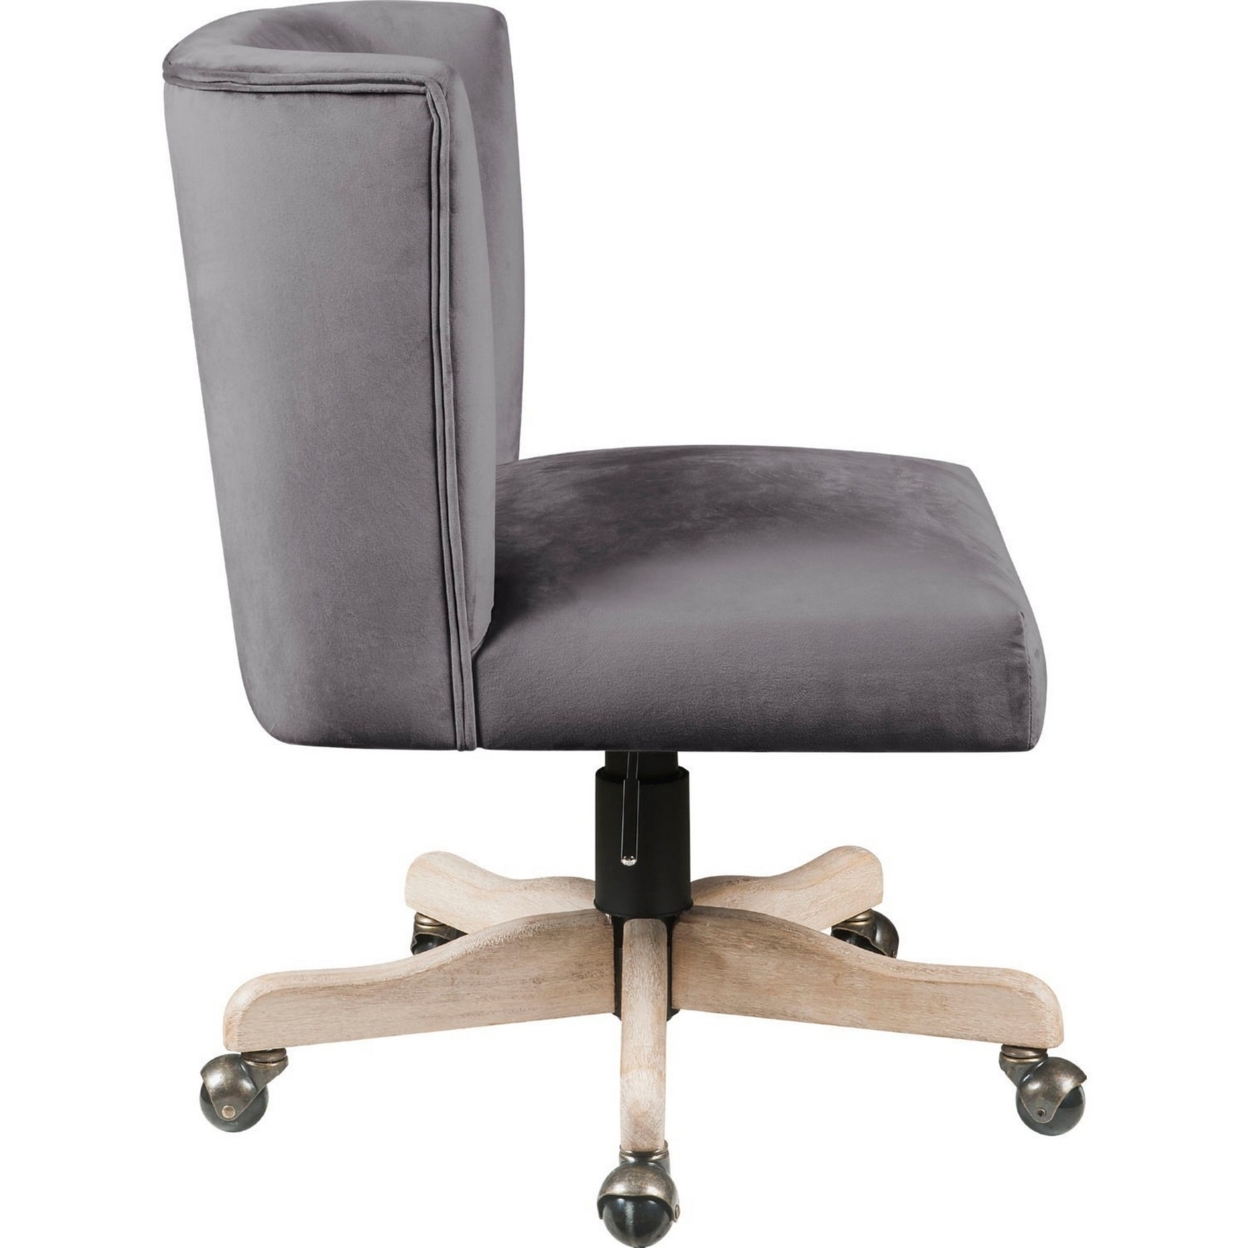 Swivel Office Chair With Fabric Upholstery And Wooden Star Base, Gray- Saltoro Sherpi